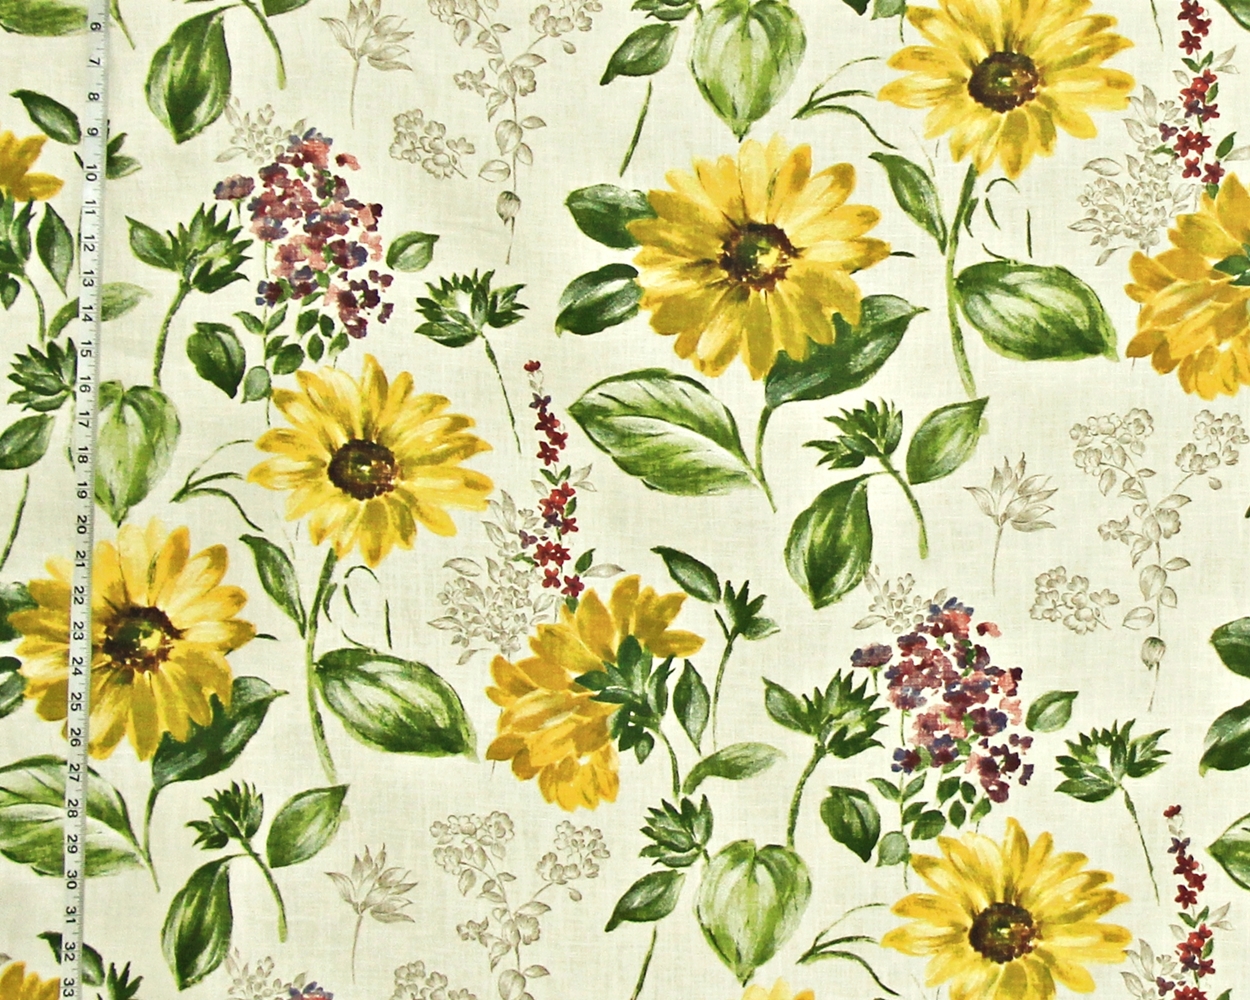 FRENCH SUNFLOWER MEADOW FABRIC